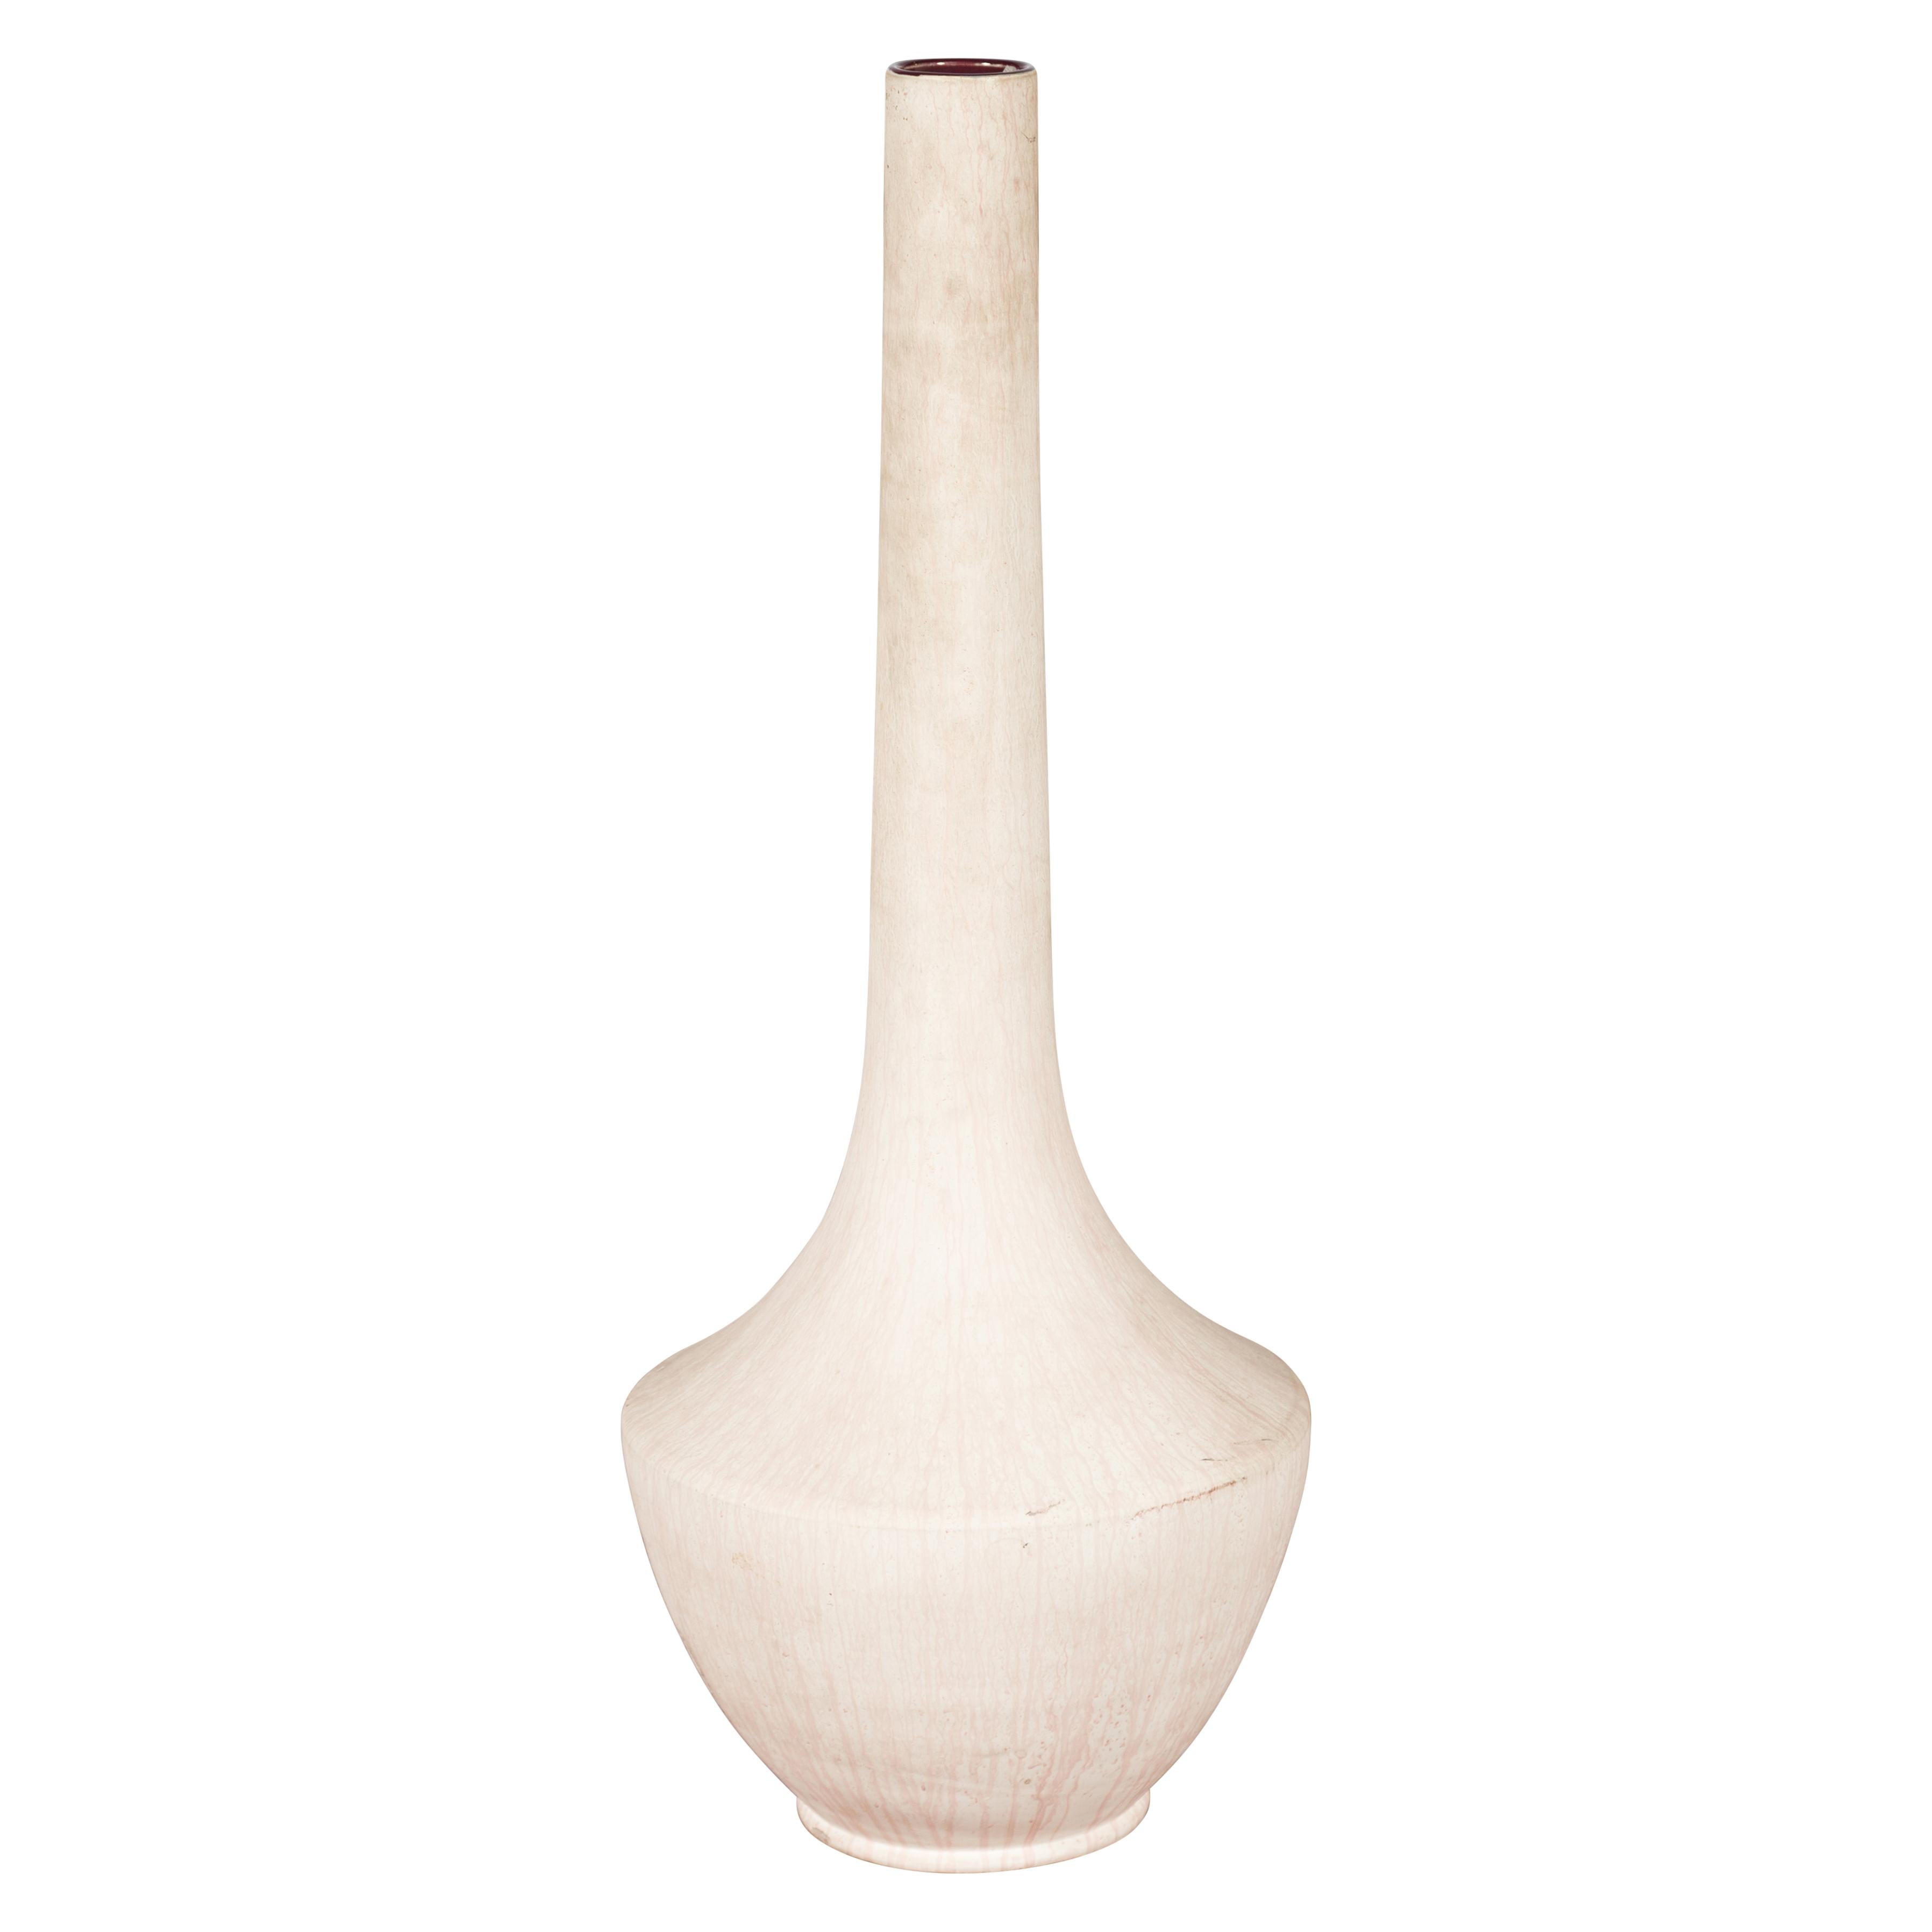 A tall contemporary Northern Thai vase from the Prem Collection, with white finish and slender neck. Charming our eyes with its pure lines and white finish, this vase was born in Chiang Mai, northern Thailand. Showcasing an opening of 2